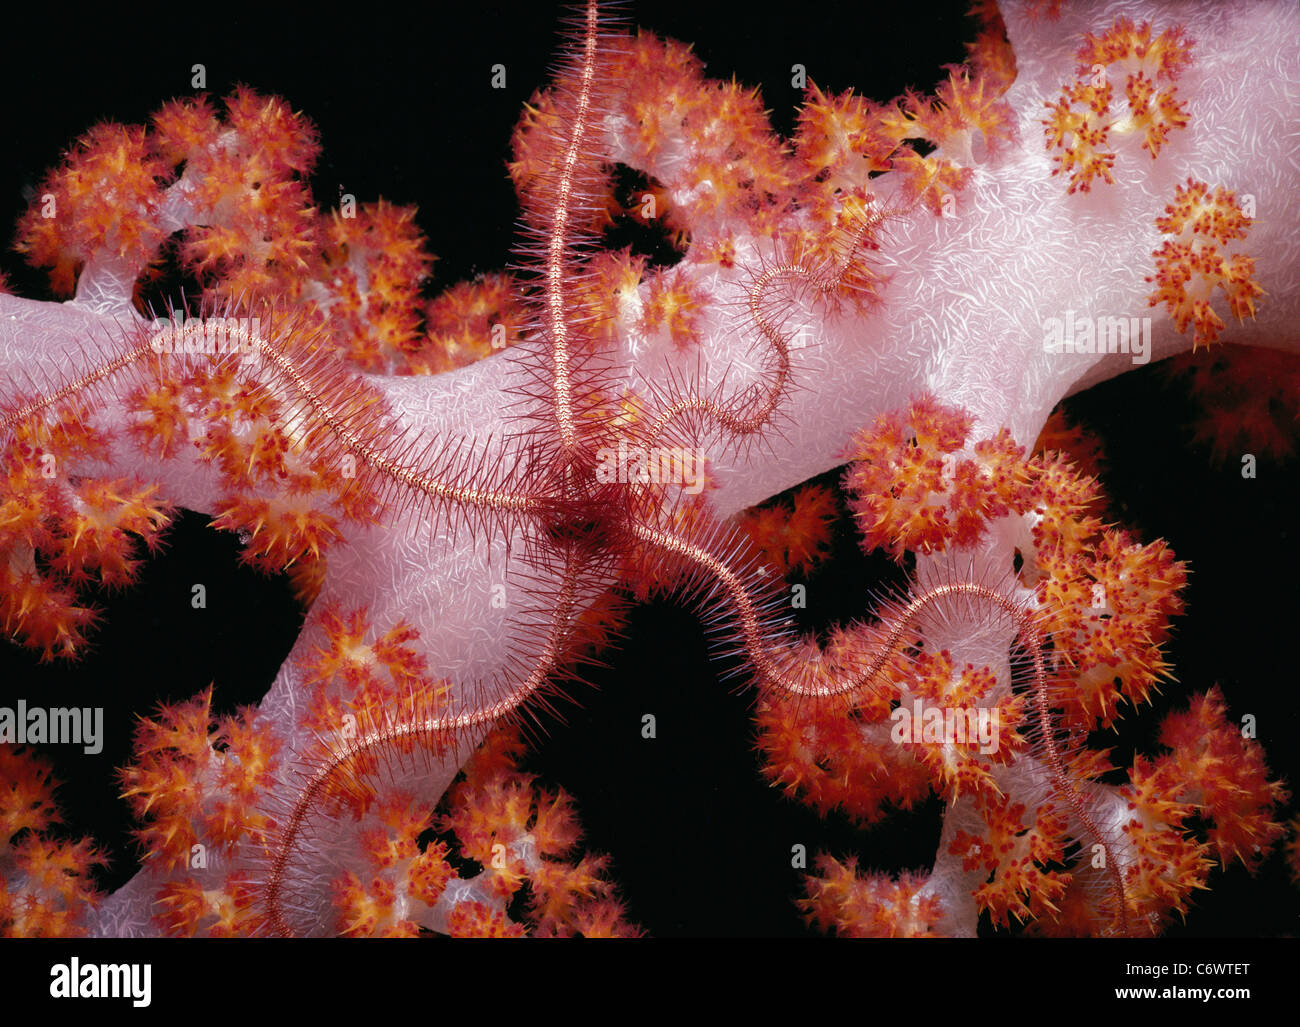 Brittle Star (Ophiothrix sp.) scavenges on Alcyonarian Coral at night, Sipadan Island, Borneo, South China Sea Stock Photo